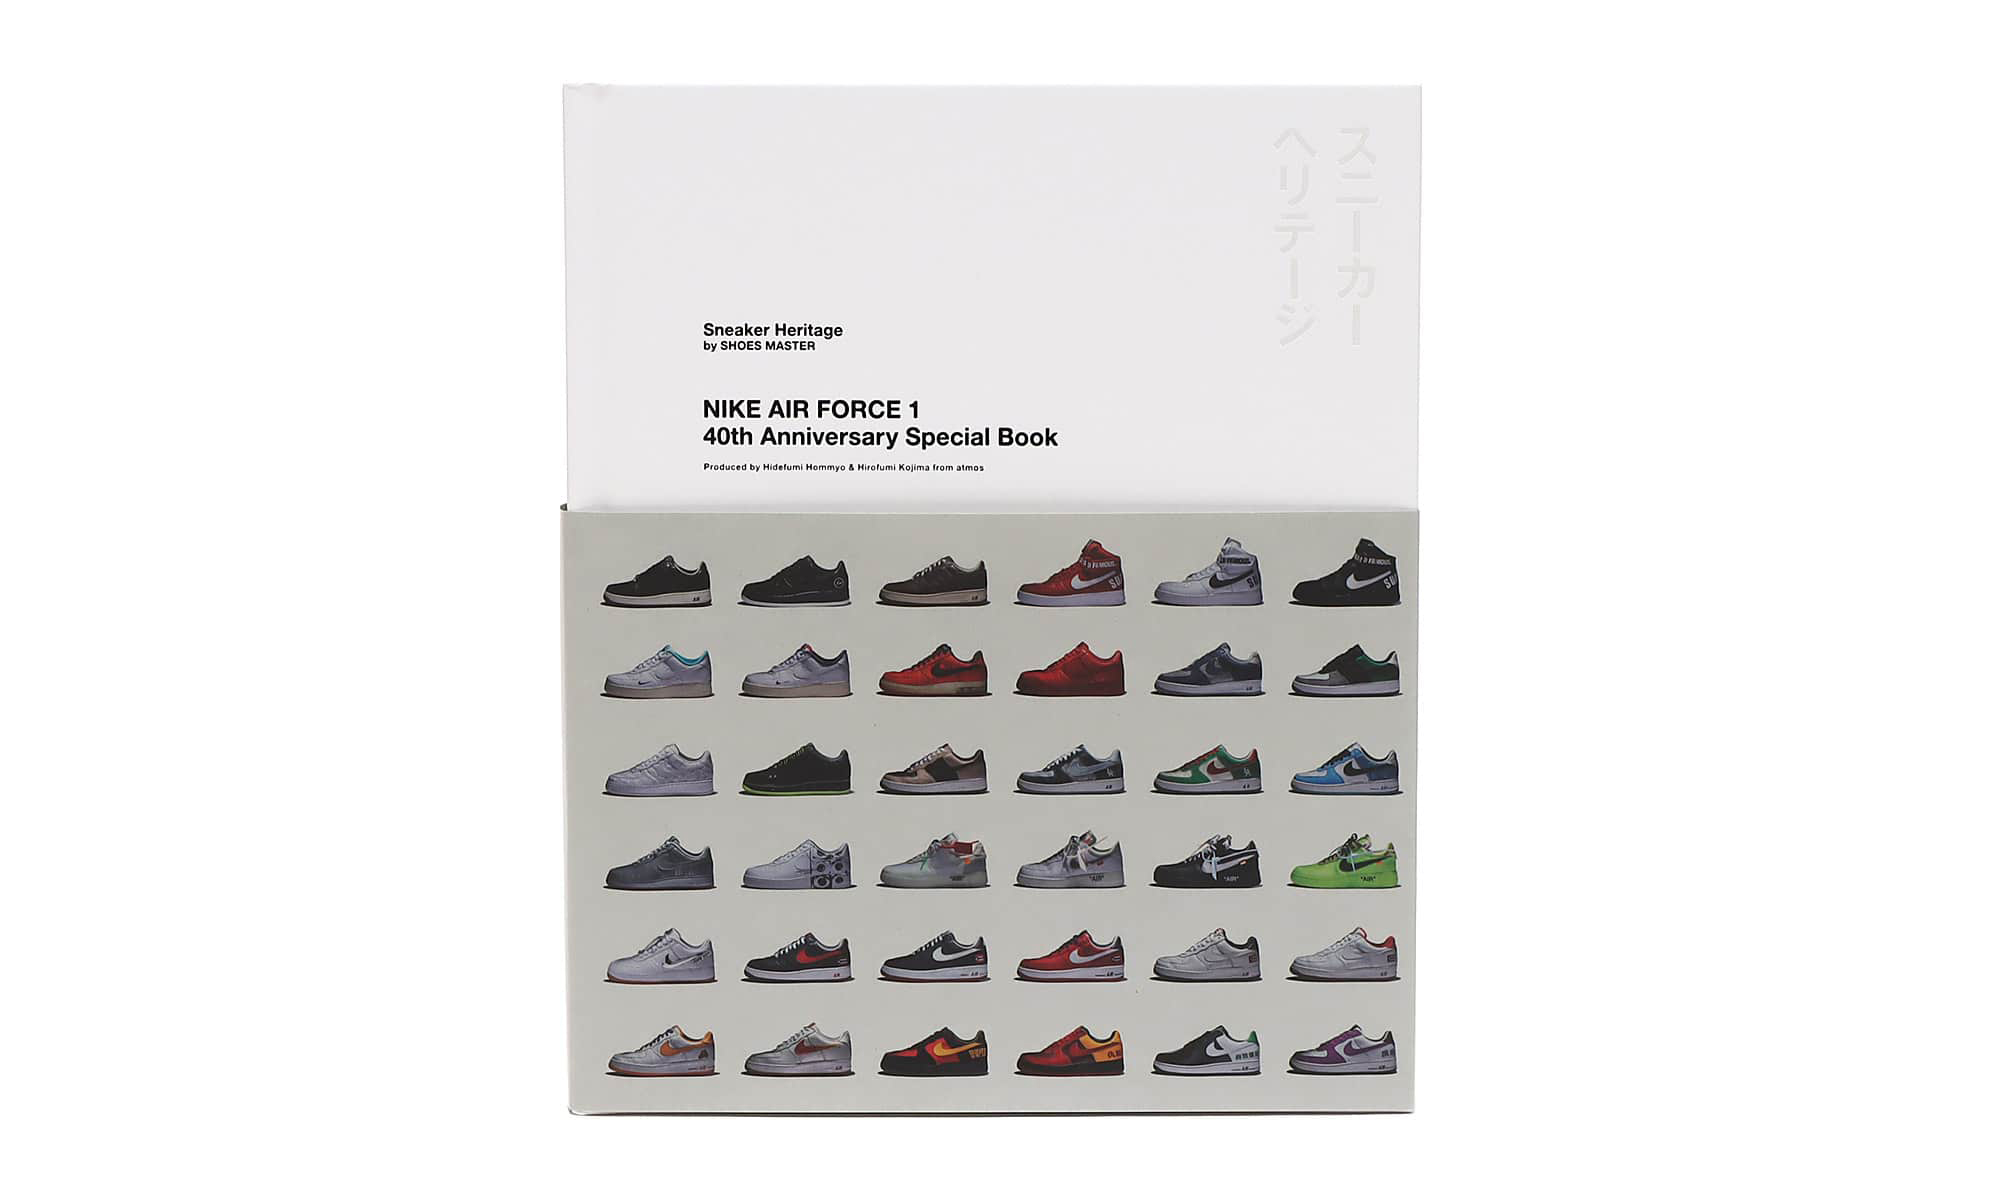 《NIKE AIR FORCE 1 40th Anniversary Special Book》纪念图册发售